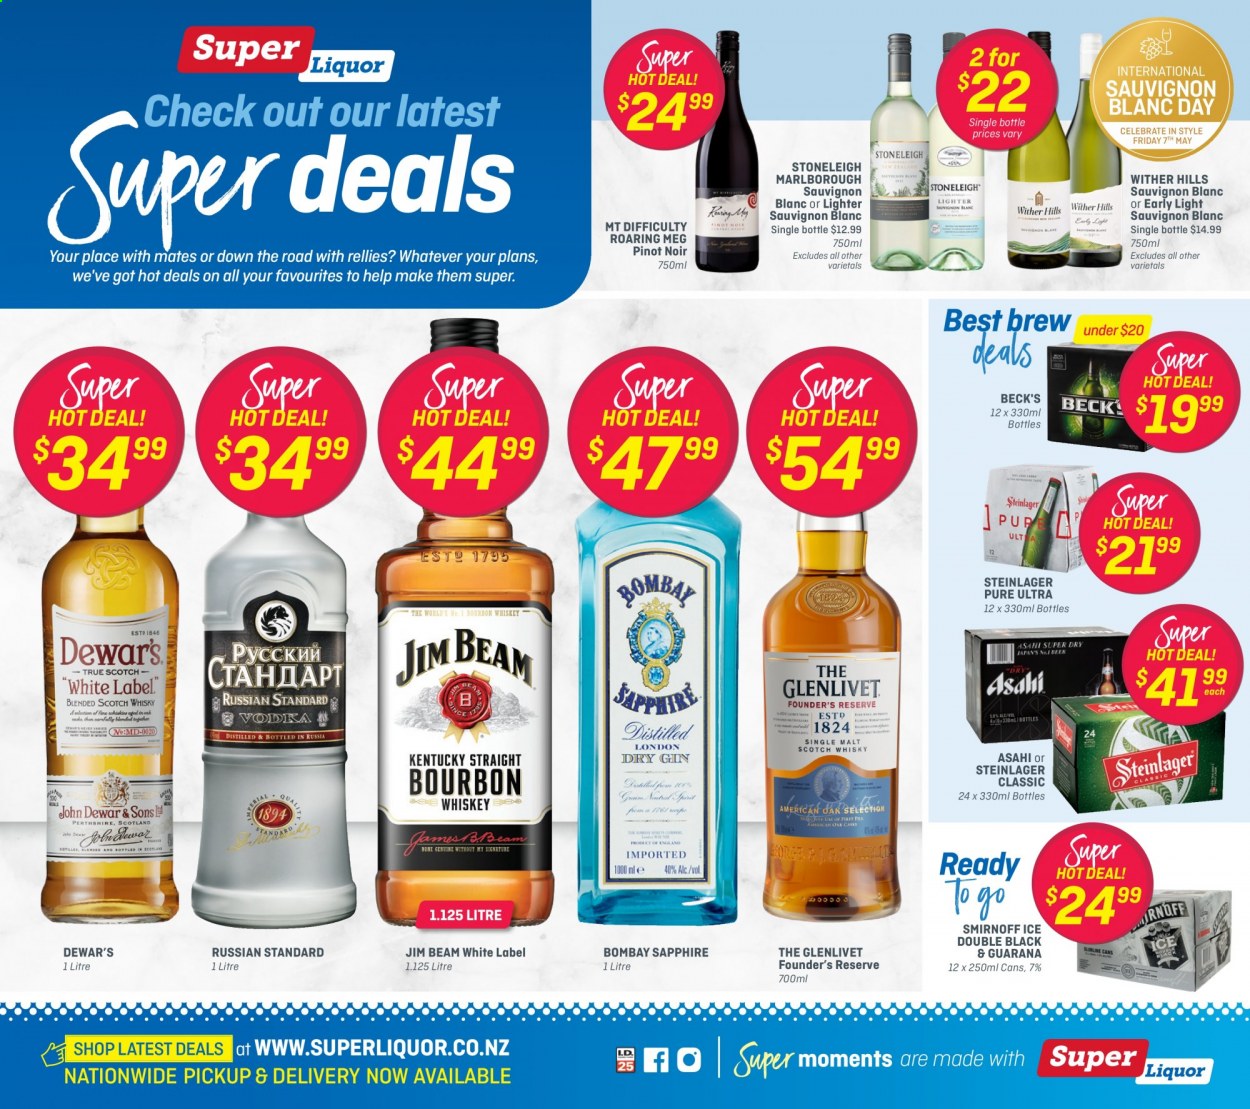 thumbnail - Super Liquor mailer - 25.04.2021 - 09.05.2021 - Sales products - red wine, white wine, wine, Pinot Noir, Wither Hills, Sauvignon Blanc, Smirnoff, Jim Beam. Page 1.